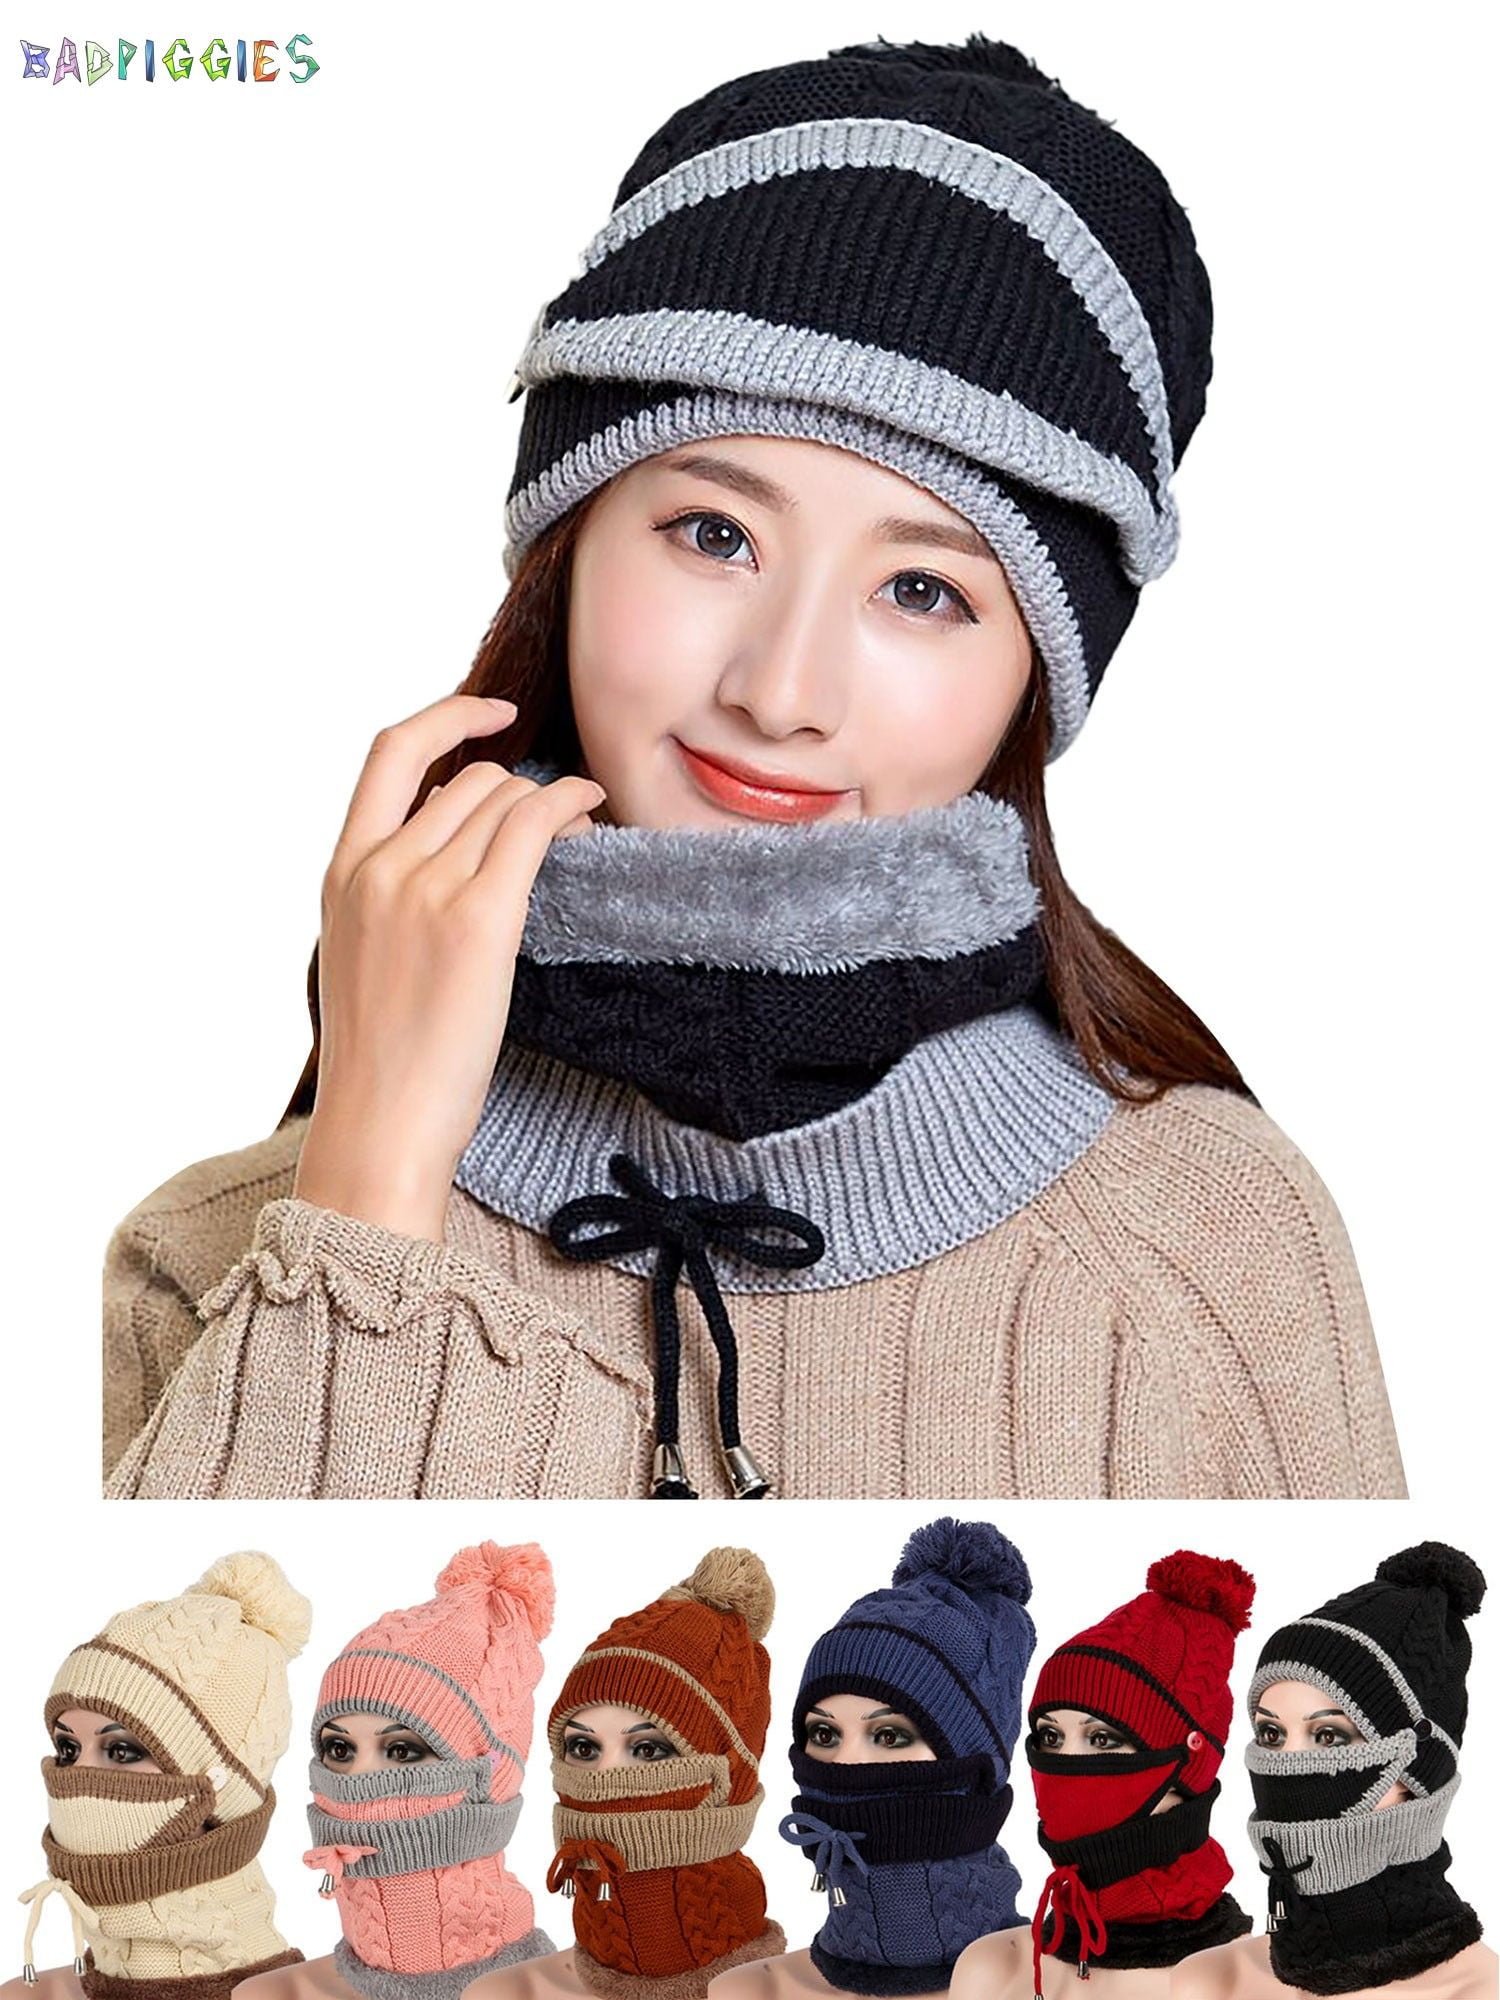 White / Black / Brown /Green/ Red Knitted Hat Keep warm Removable Hats For Women // Girl Accessories Scarves & Wraps Collars & Bibs Knitted Balaclava 